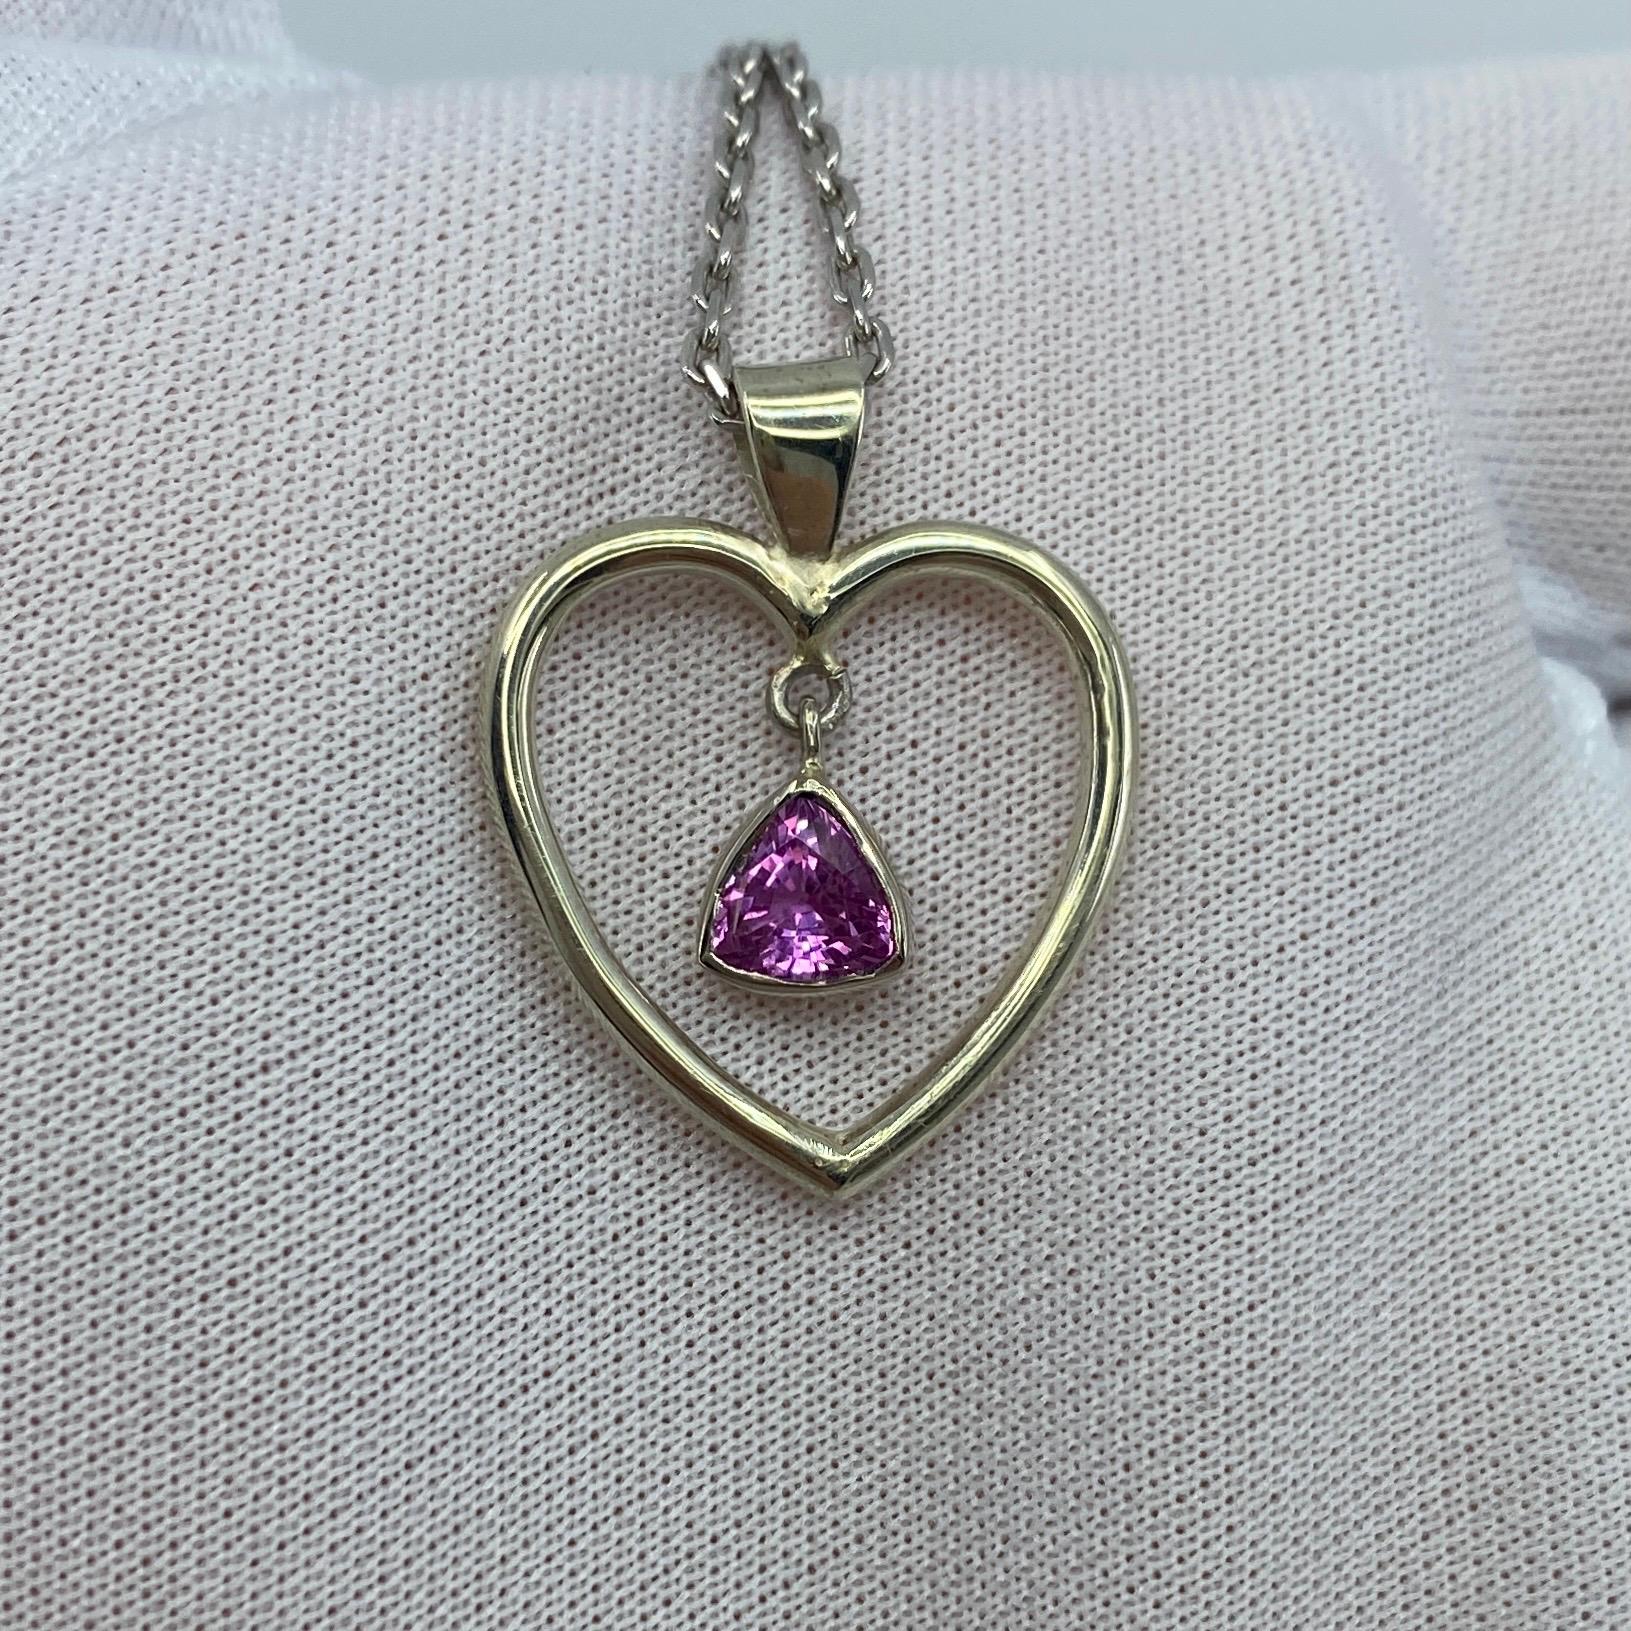 Pink Tourmaline 9k White Gold Pendant Necklace.

Beautiful handmade 0.85 carat vivid pink tourmaline set in a handmade rubover setting and heart pendant.

Top quality, beautiful necklace.

Hanging on an 20' white gold cable chain.

Brand new and